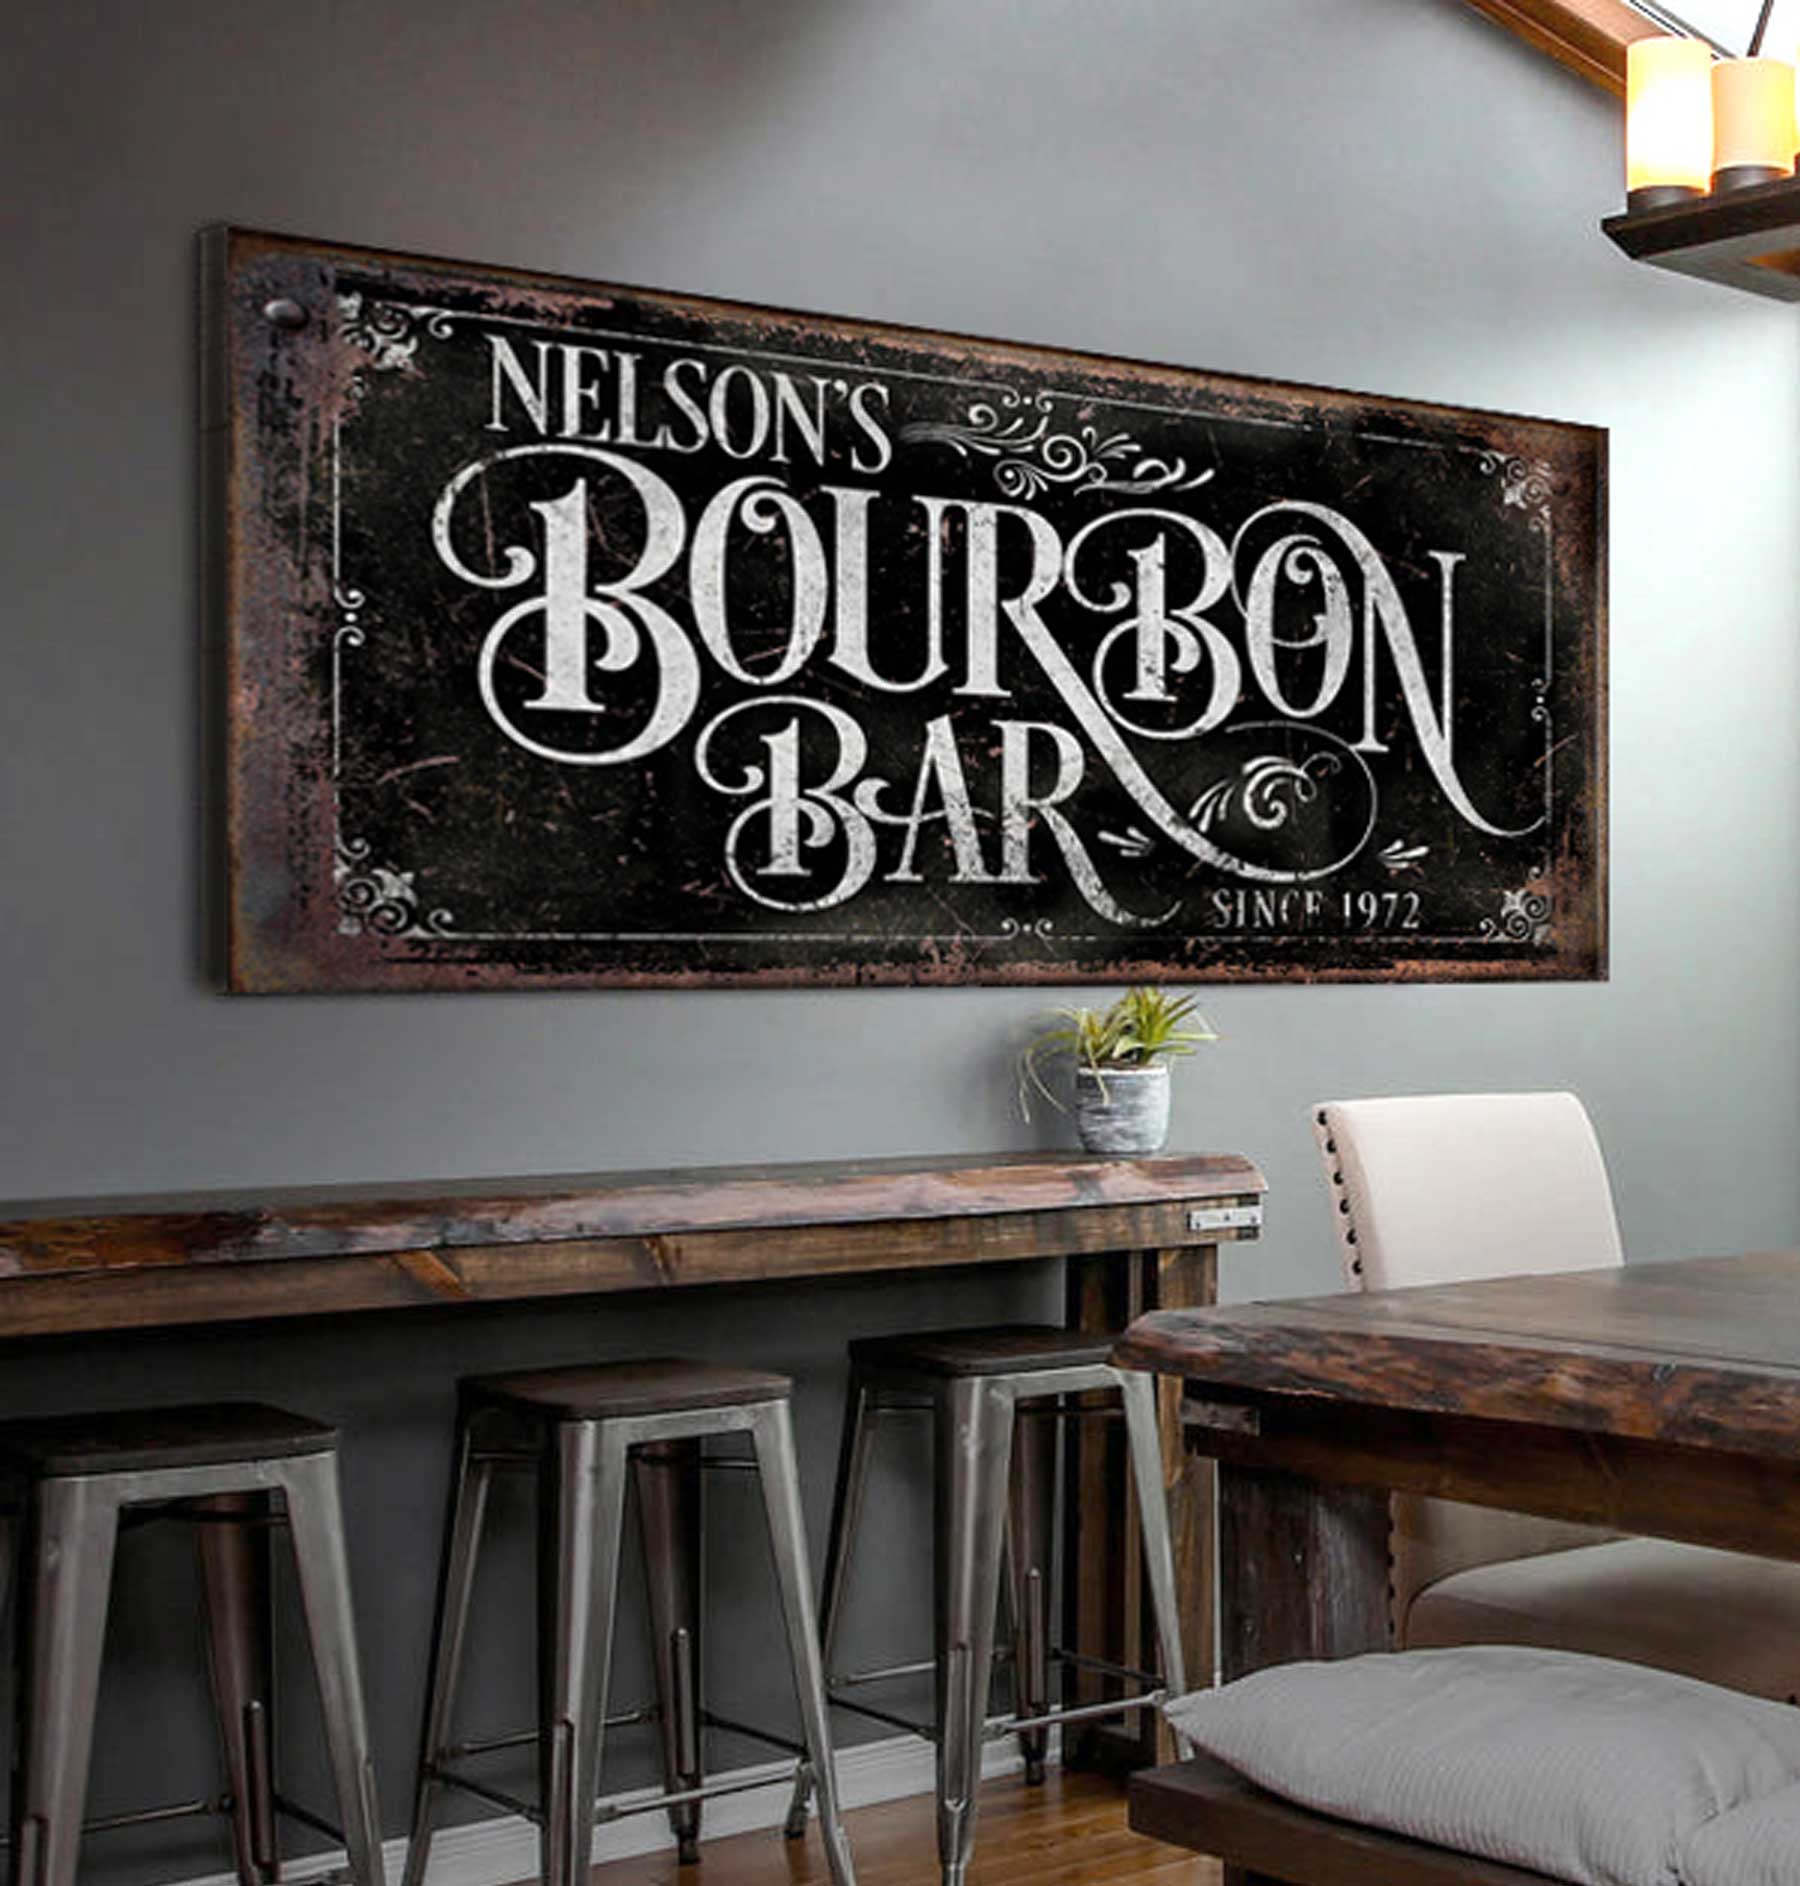 Welcome Speakeasy Sign Home Bar Den Whisky Beer Prohibition Wall Decor —  Chico Creek Signs